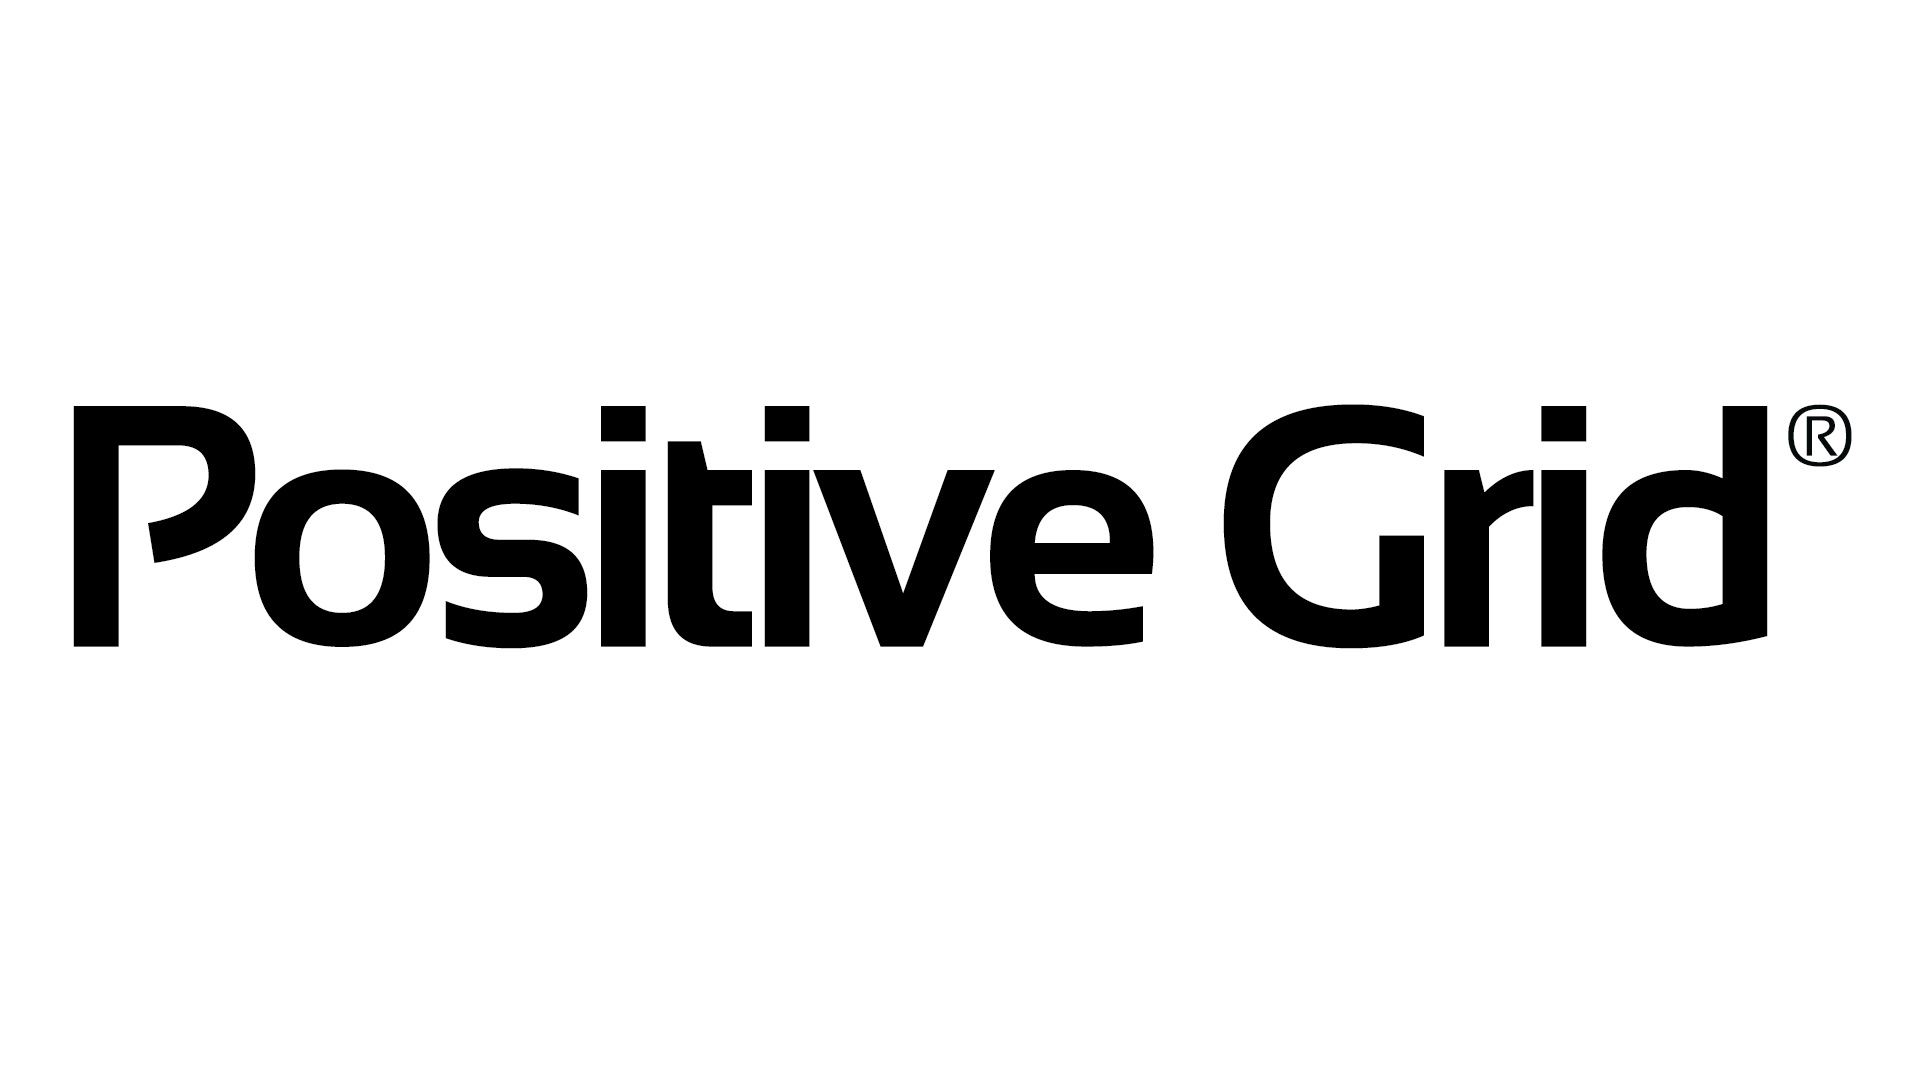 Positive Grid coupon codes, promo codes and deals